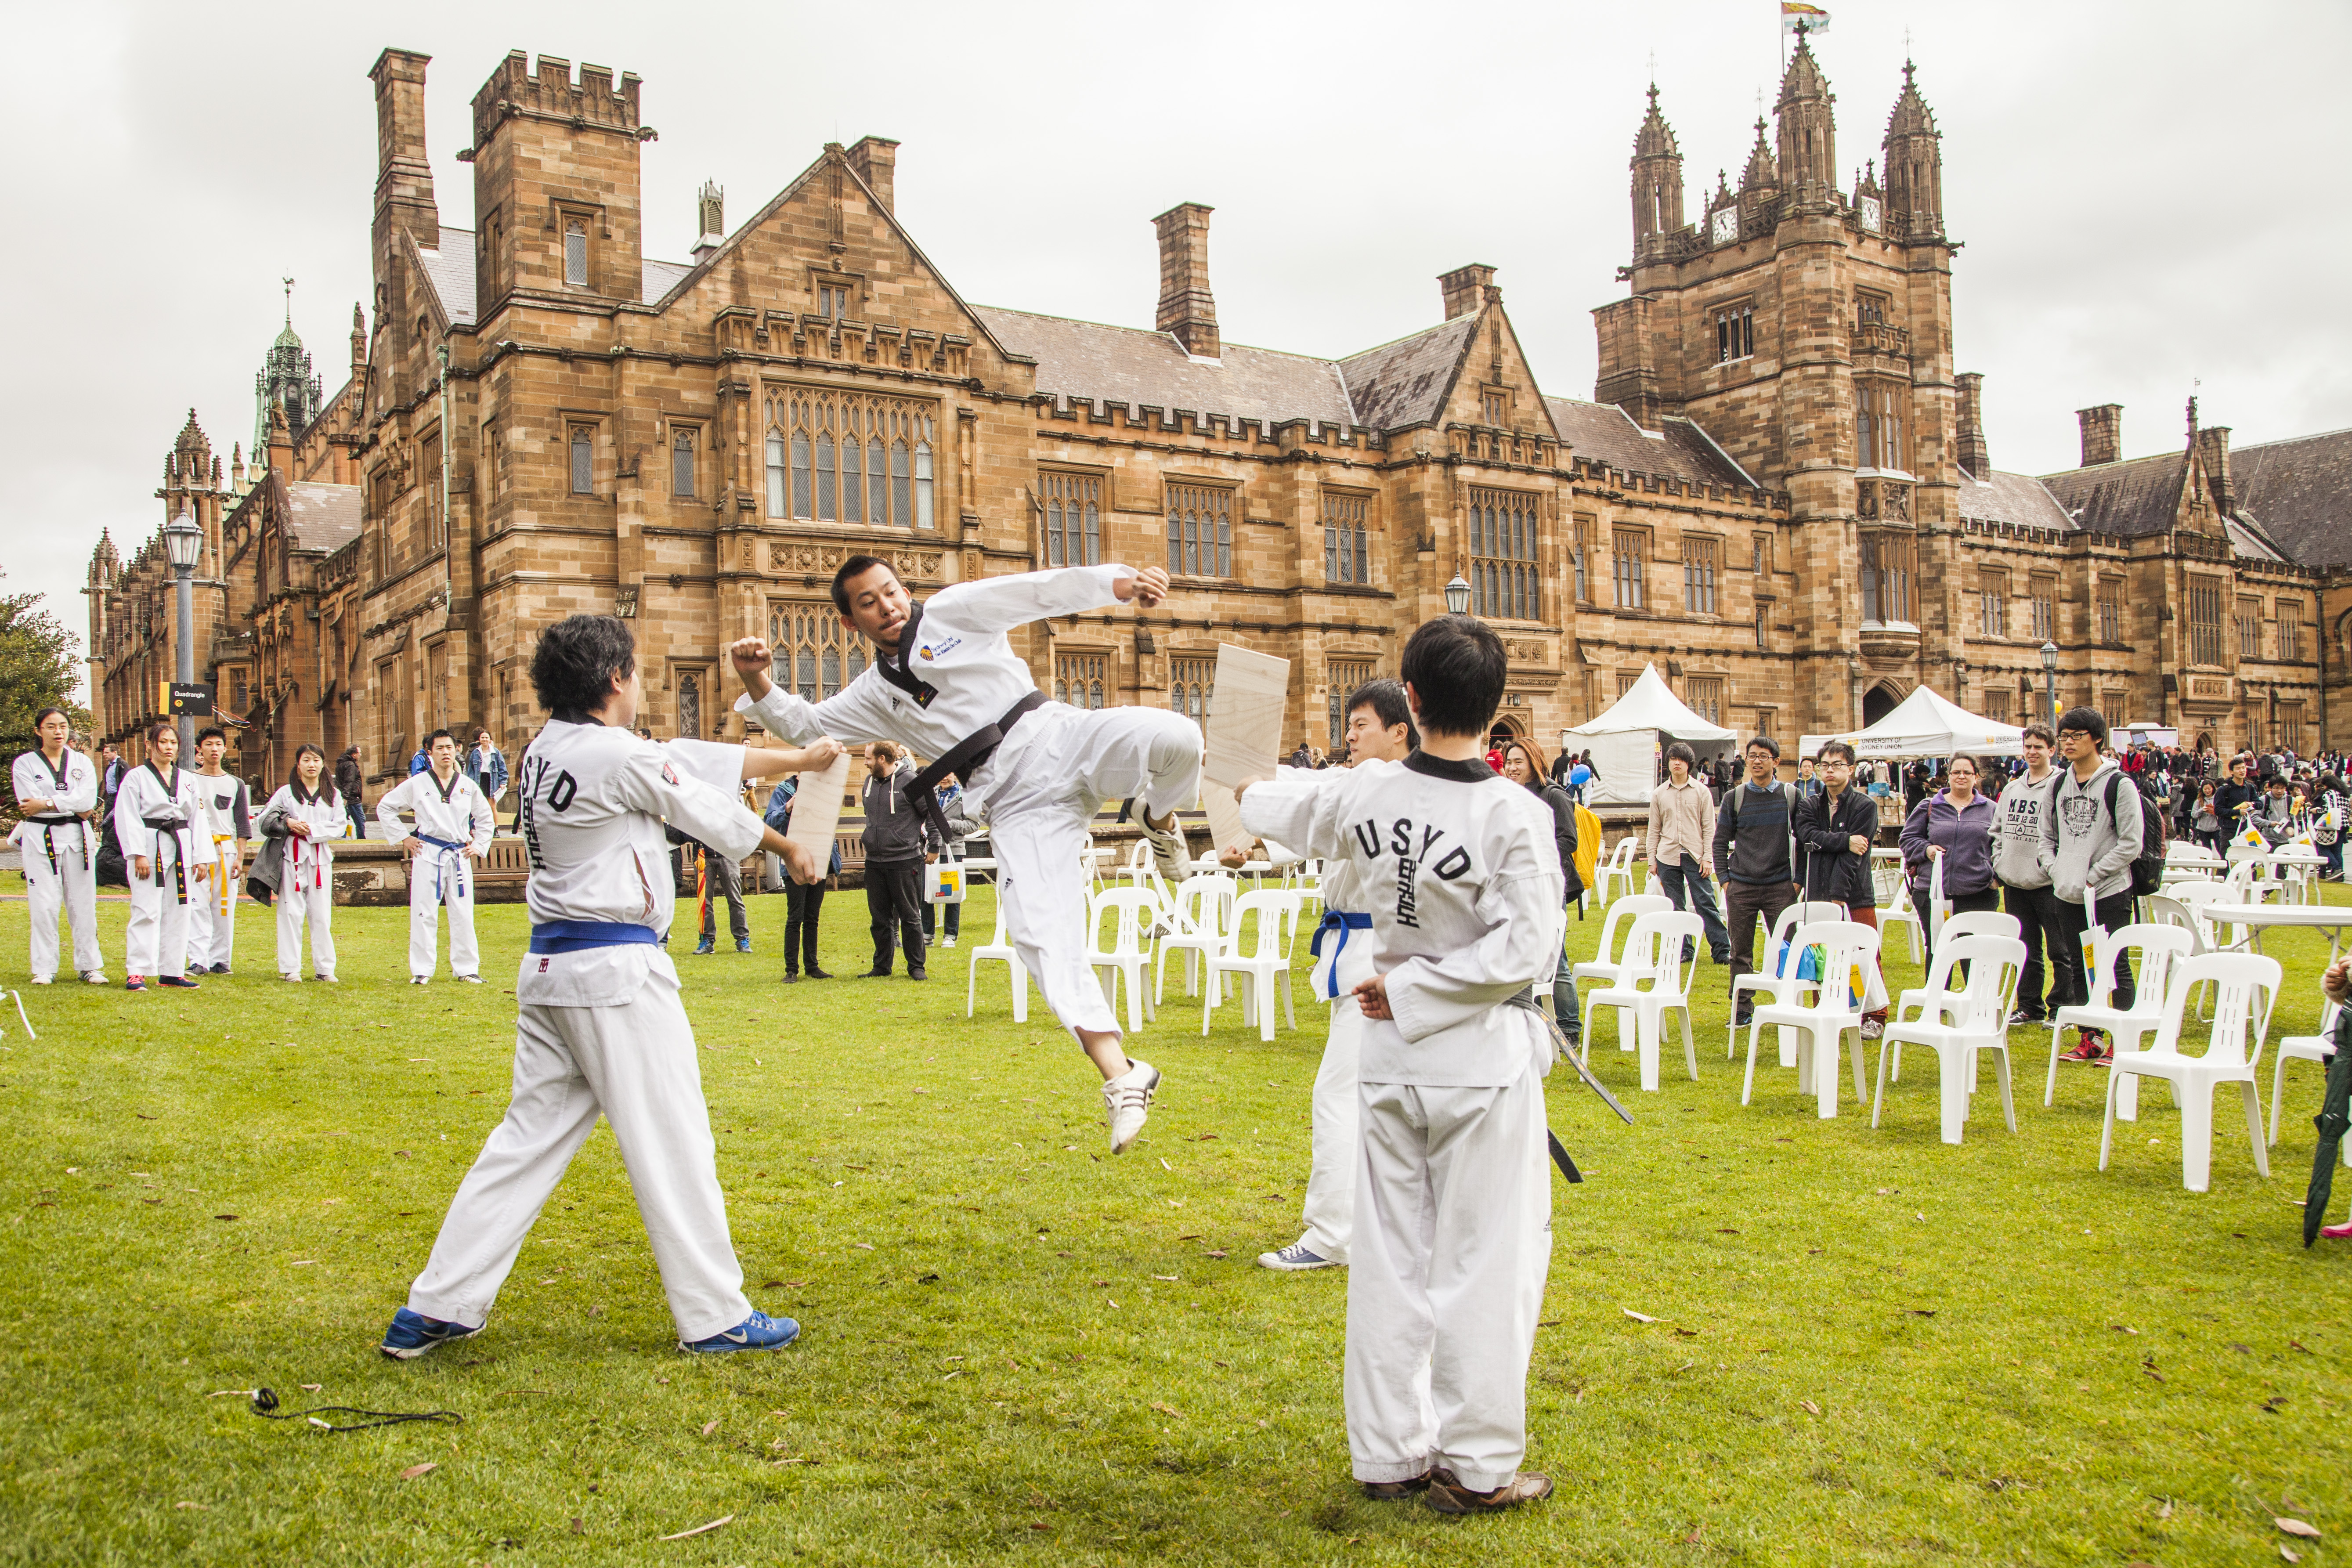 Students outside the Quad demonstrating karate